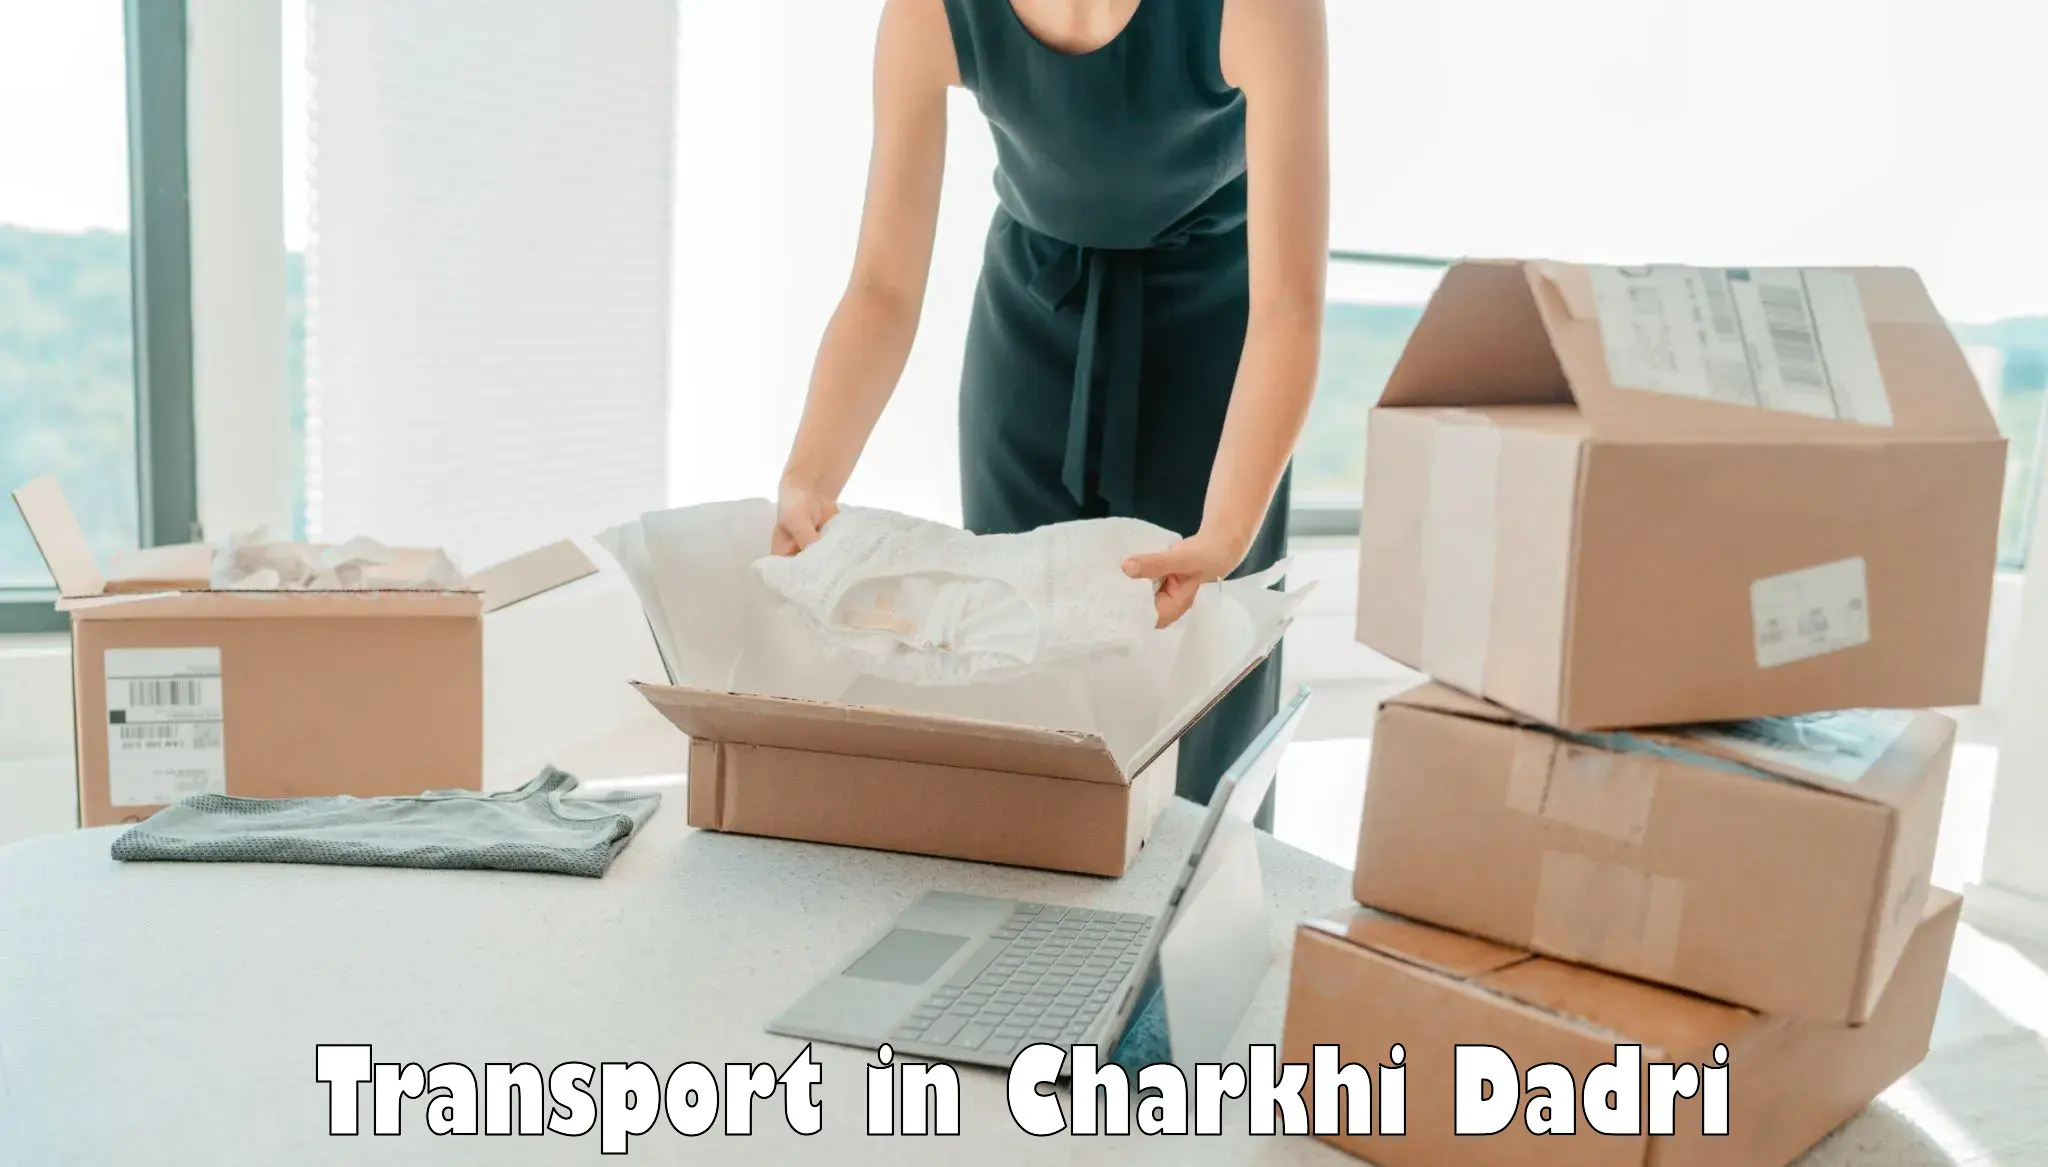 Shipping services in Charkhi Dadri